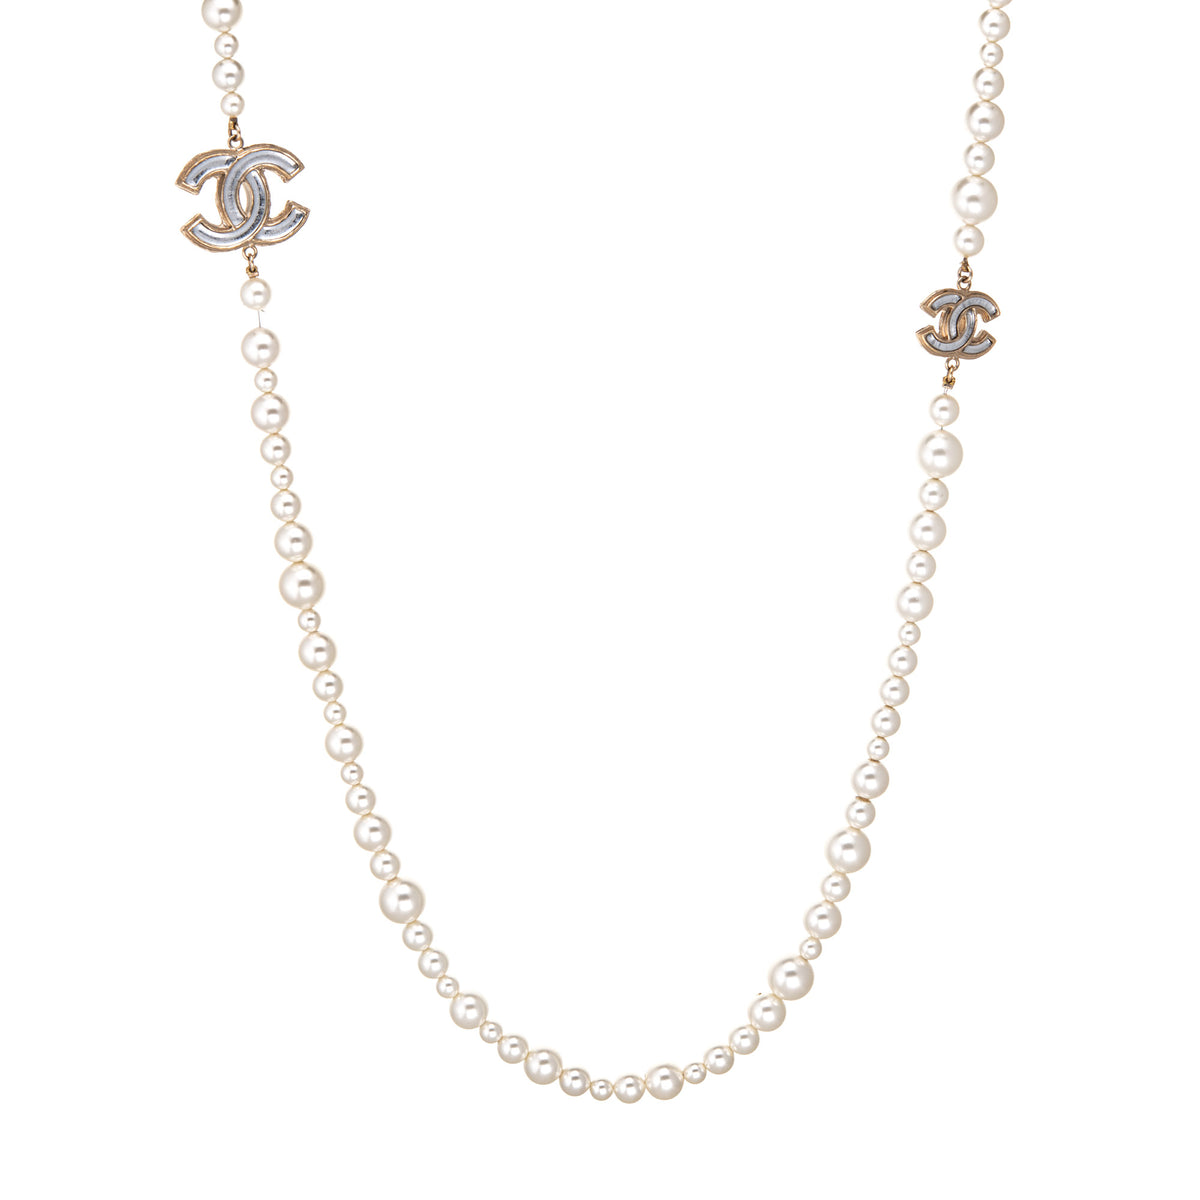 Chanel Graduated Pearl Necklace